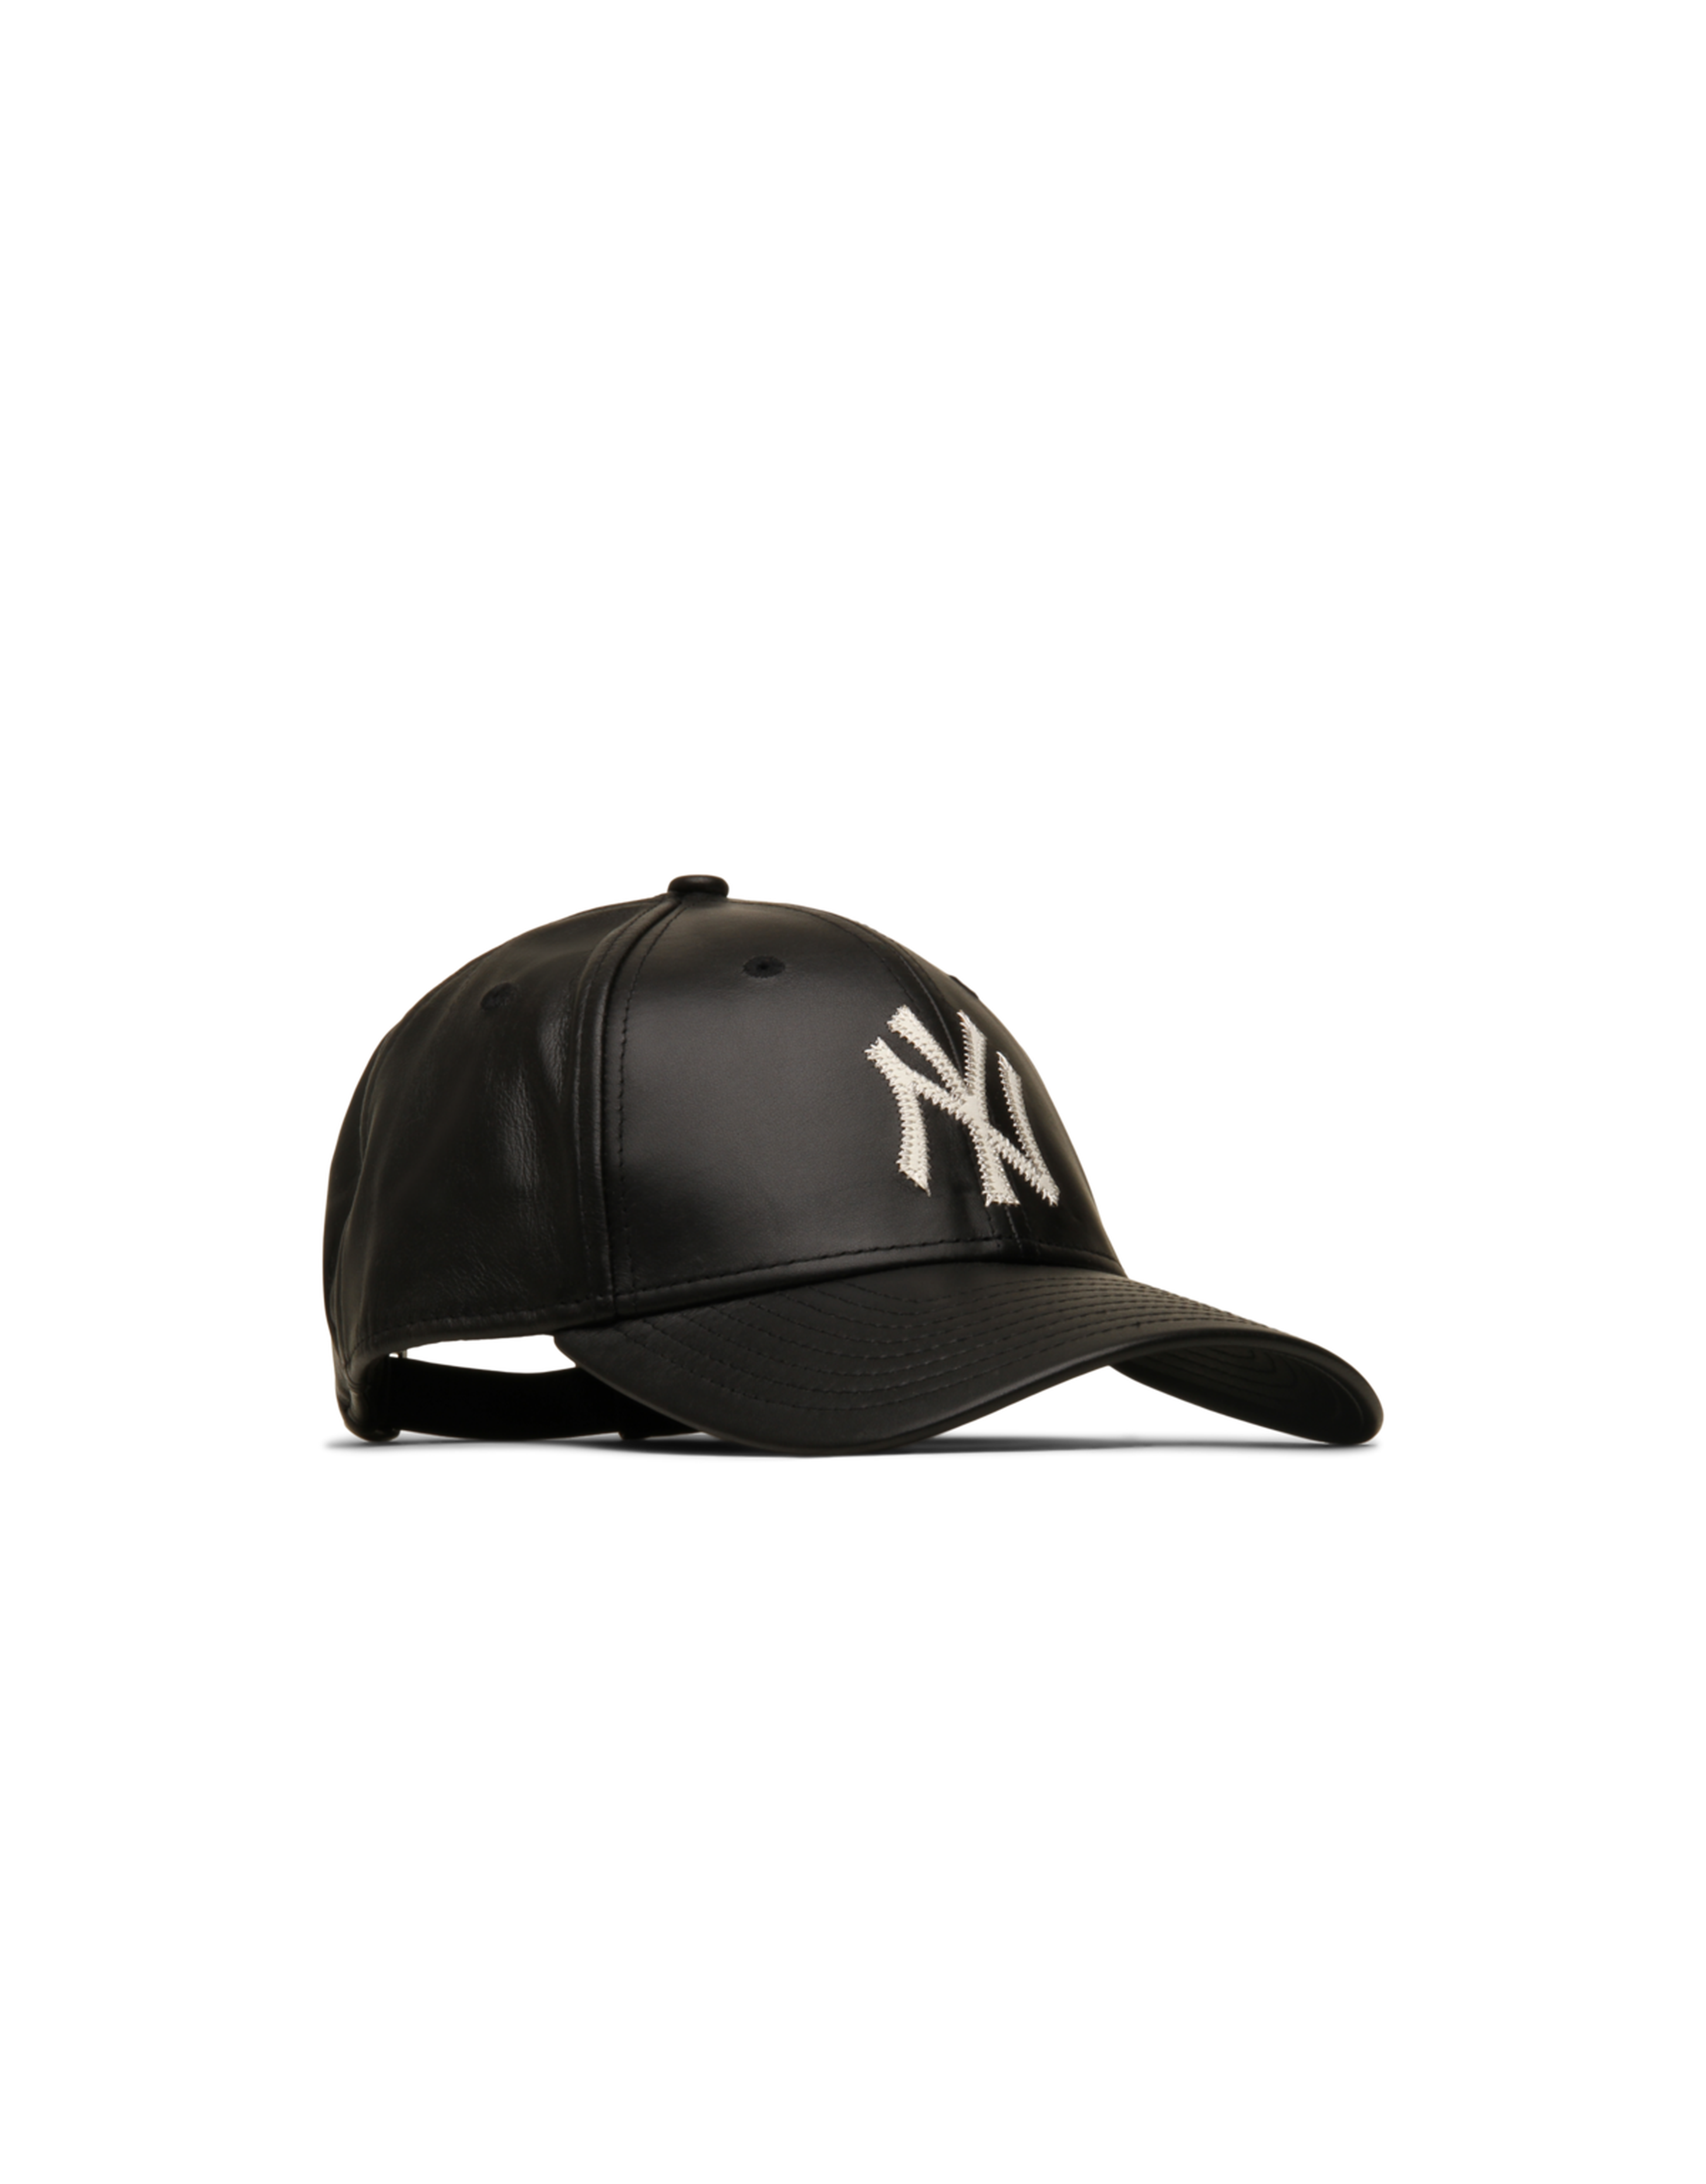 NY Yankees 9FORTY Adjustable Leather Cap